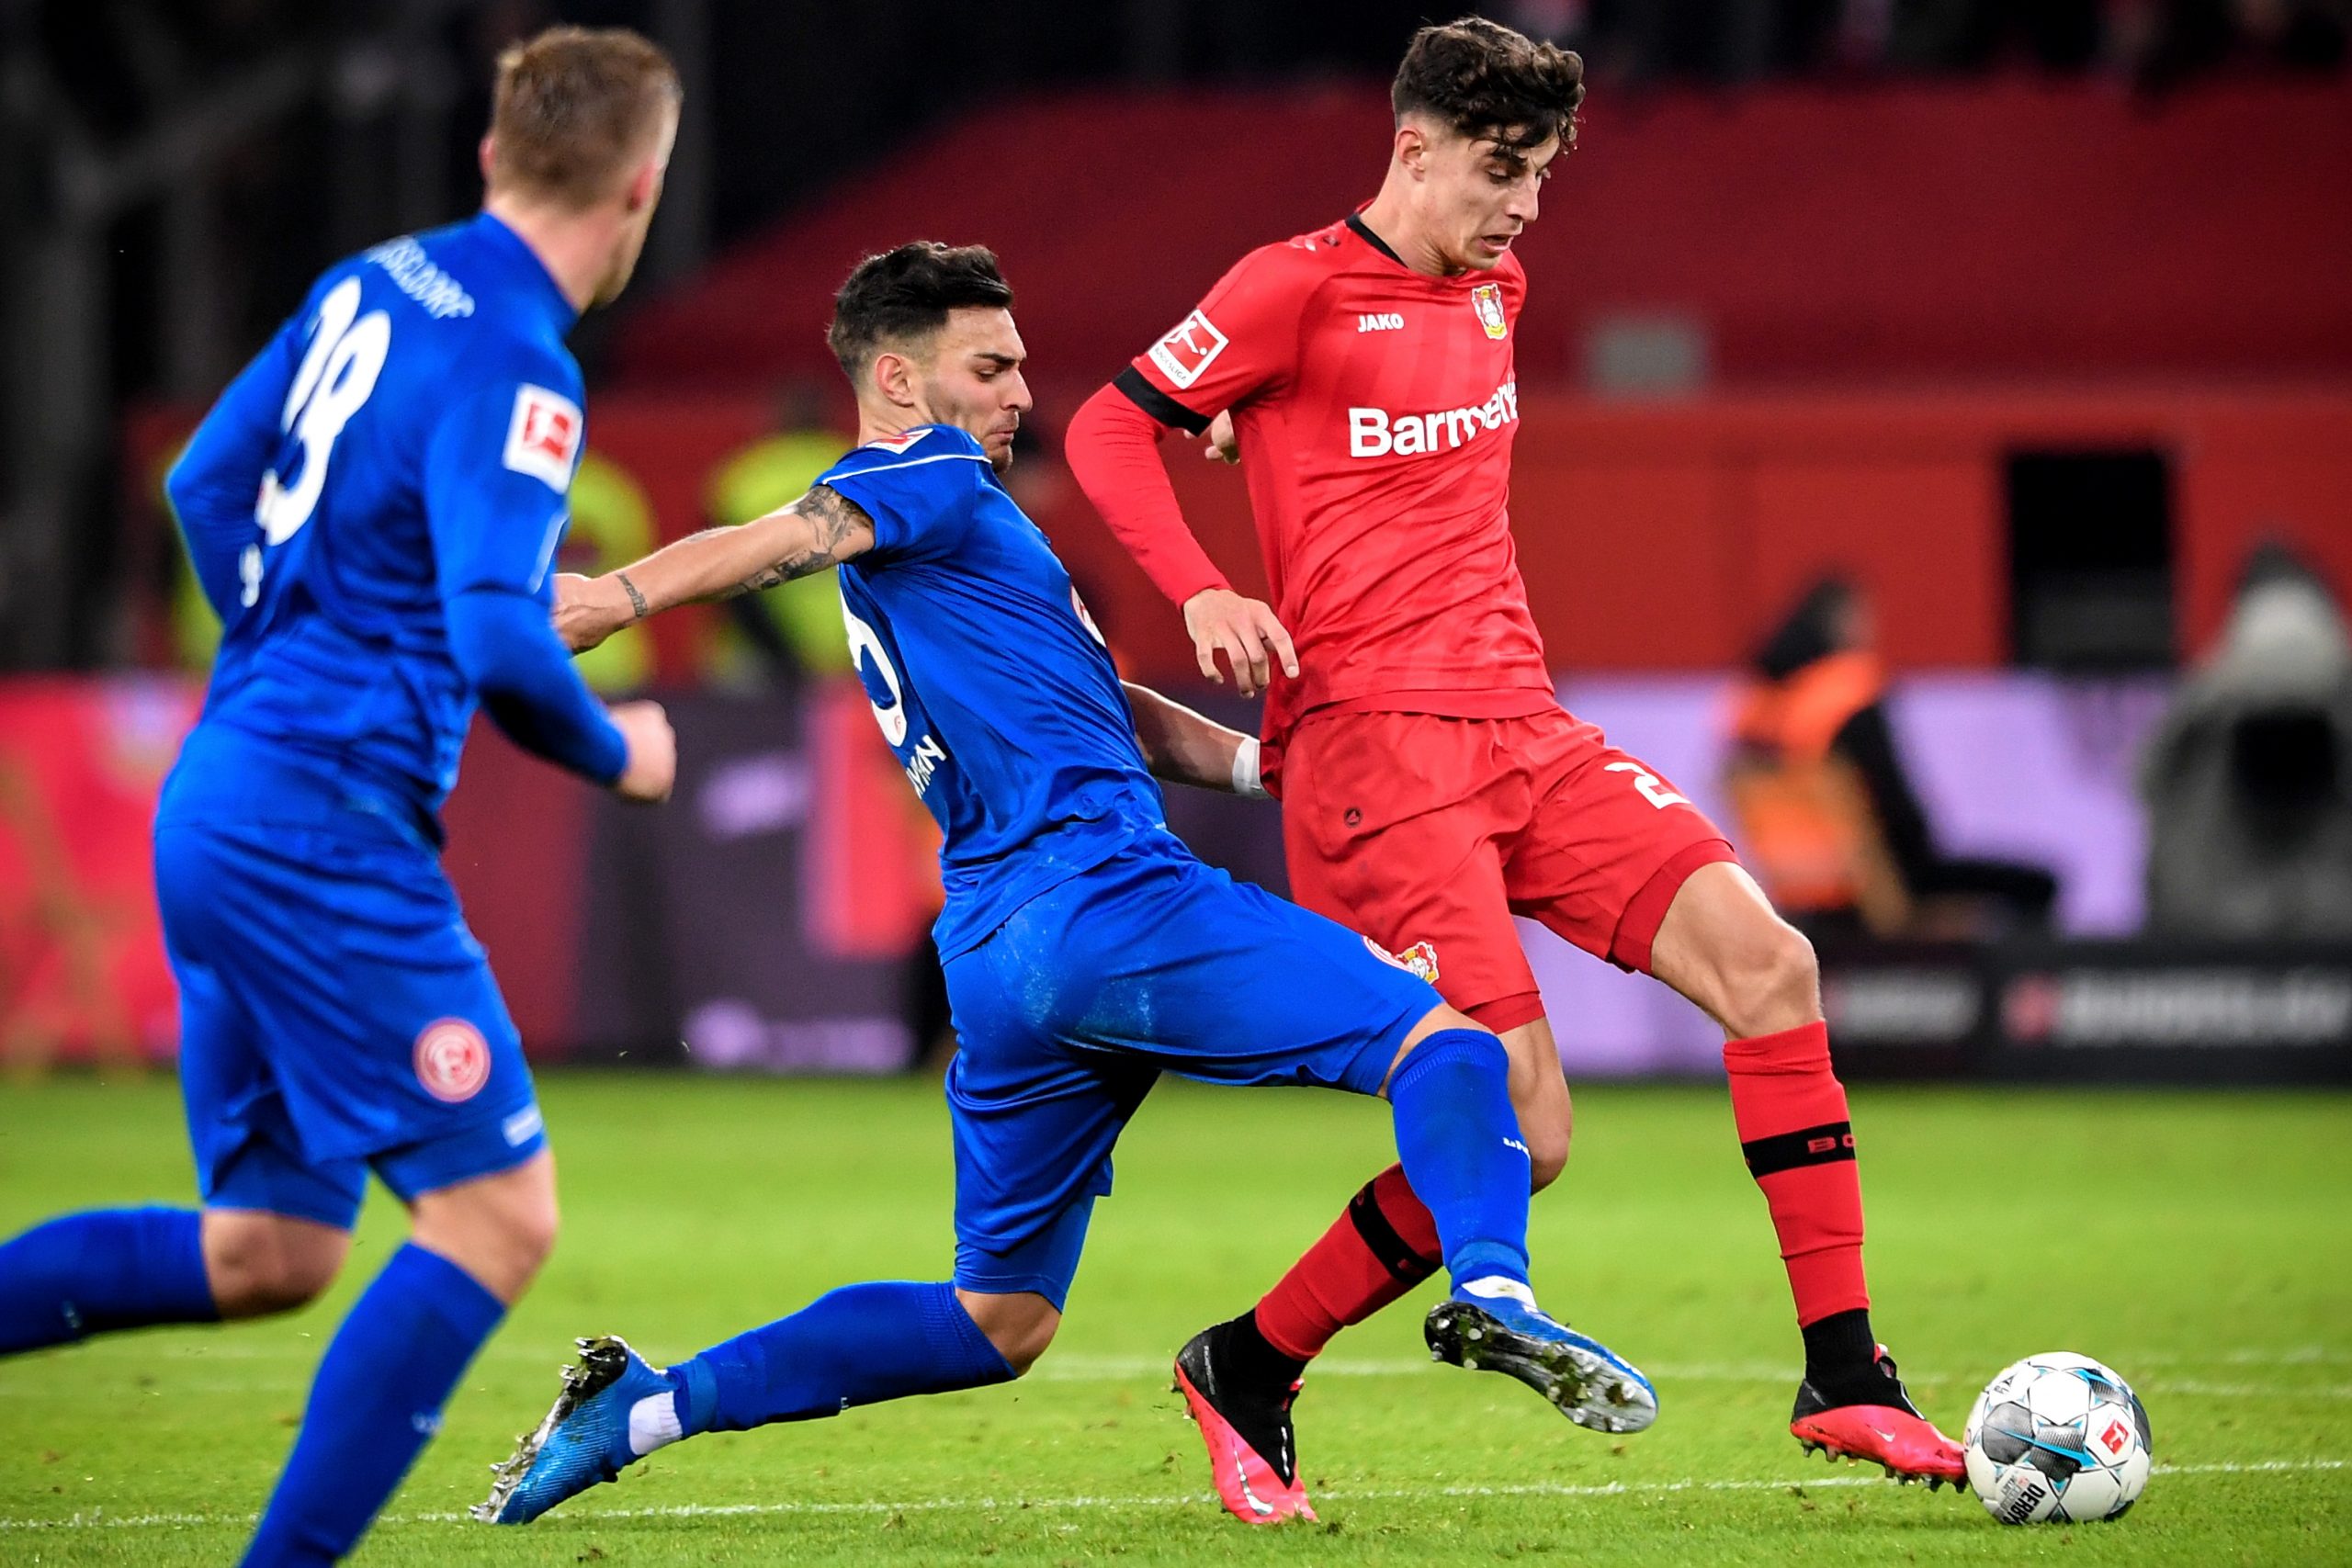 epa08167600 Duesseldorf's Kaan Ayhan (C) in action against Leverkusen's Kai Havertz (R) during the German Bundesliga soccer match between Bayer Leverkusen and Fortuna Duesseldorf at BayArena in Leverkusen, Germany, 26 January 2020.  EPA/SASCHA STEINBACH CONDITIONS - ATTENTION: The DFL regulations prohibit any use of photographs as image sequences and/or quasi-video.